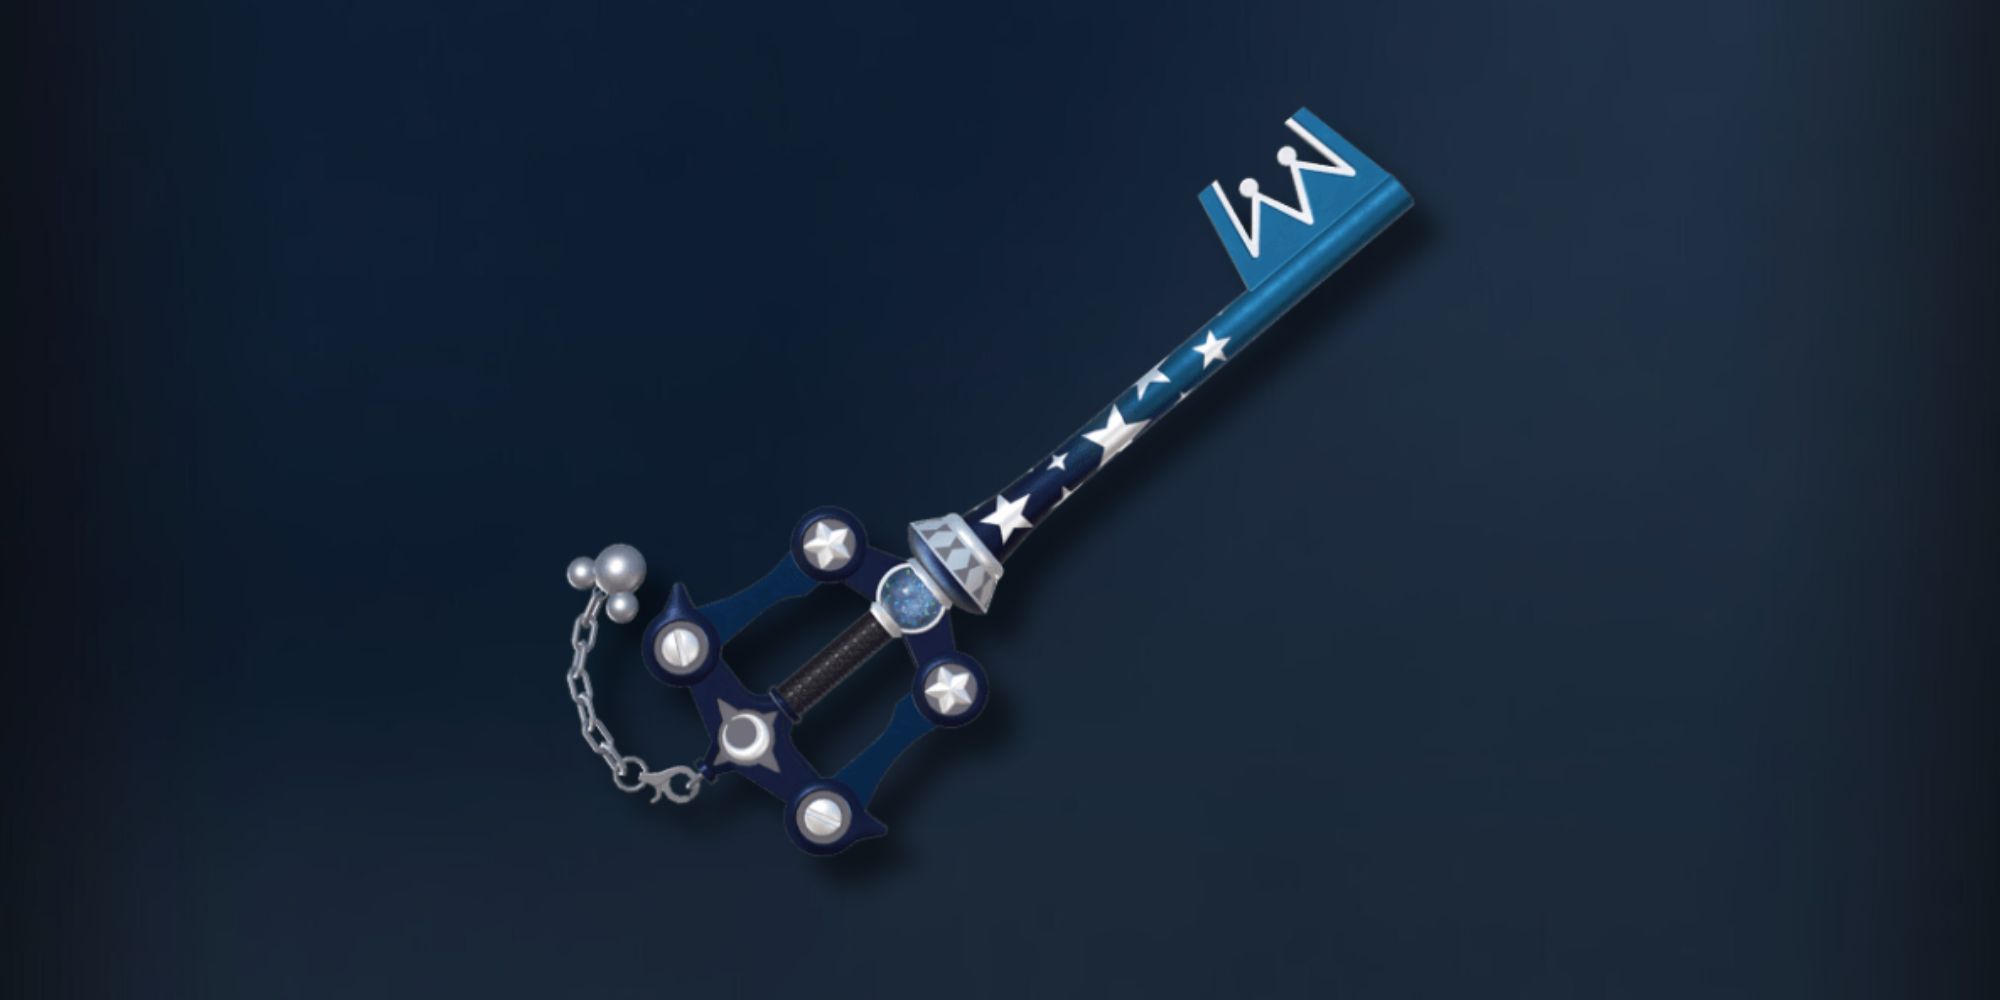 Dead of Night, the Steam Exclusive Keyblade